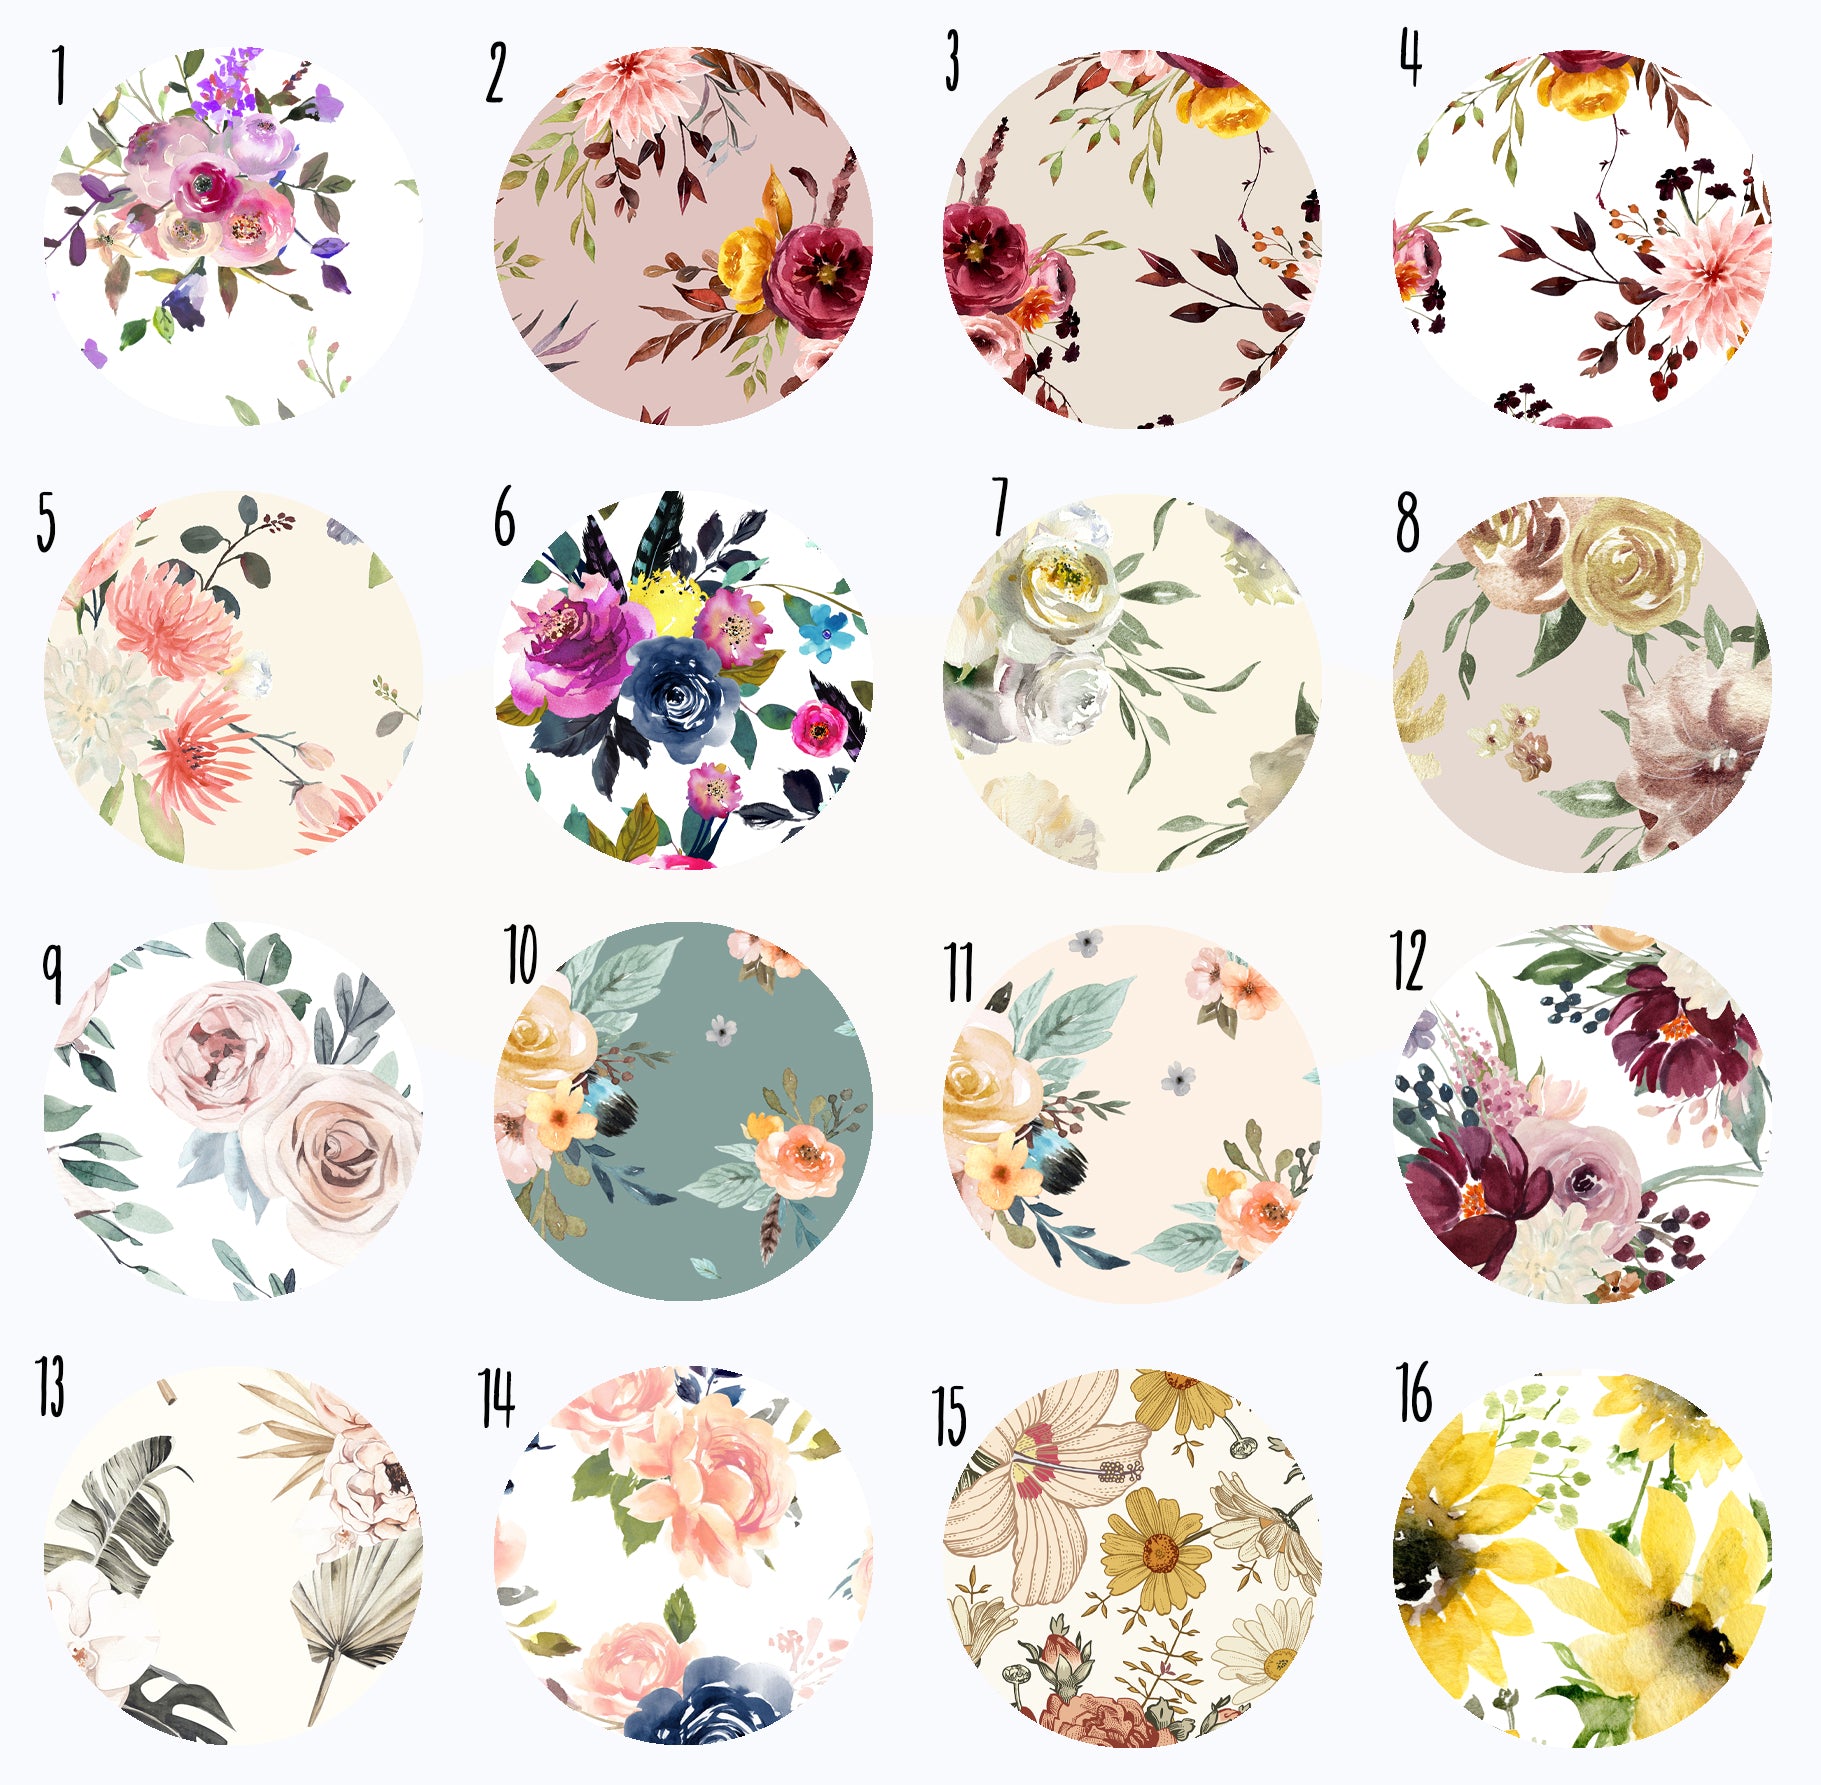 Floral Fabric Options for Crib Bedding